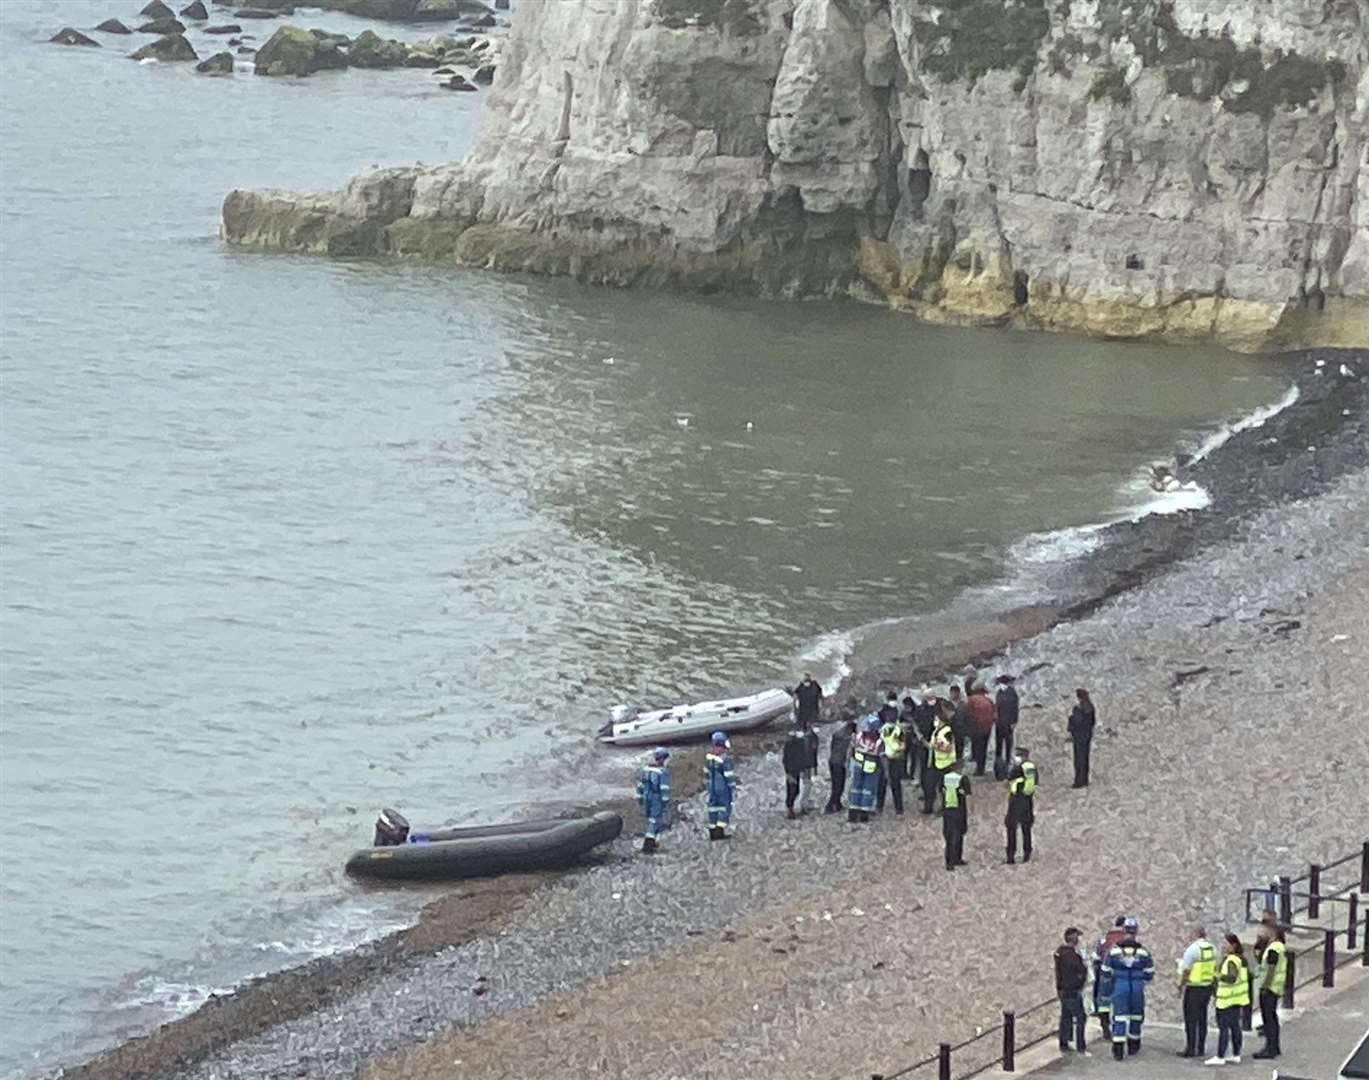 Ms Elphicke says a second boat came ashore shortly afterwards. Picture: Twitter/@NatalieElphicke (40621993)